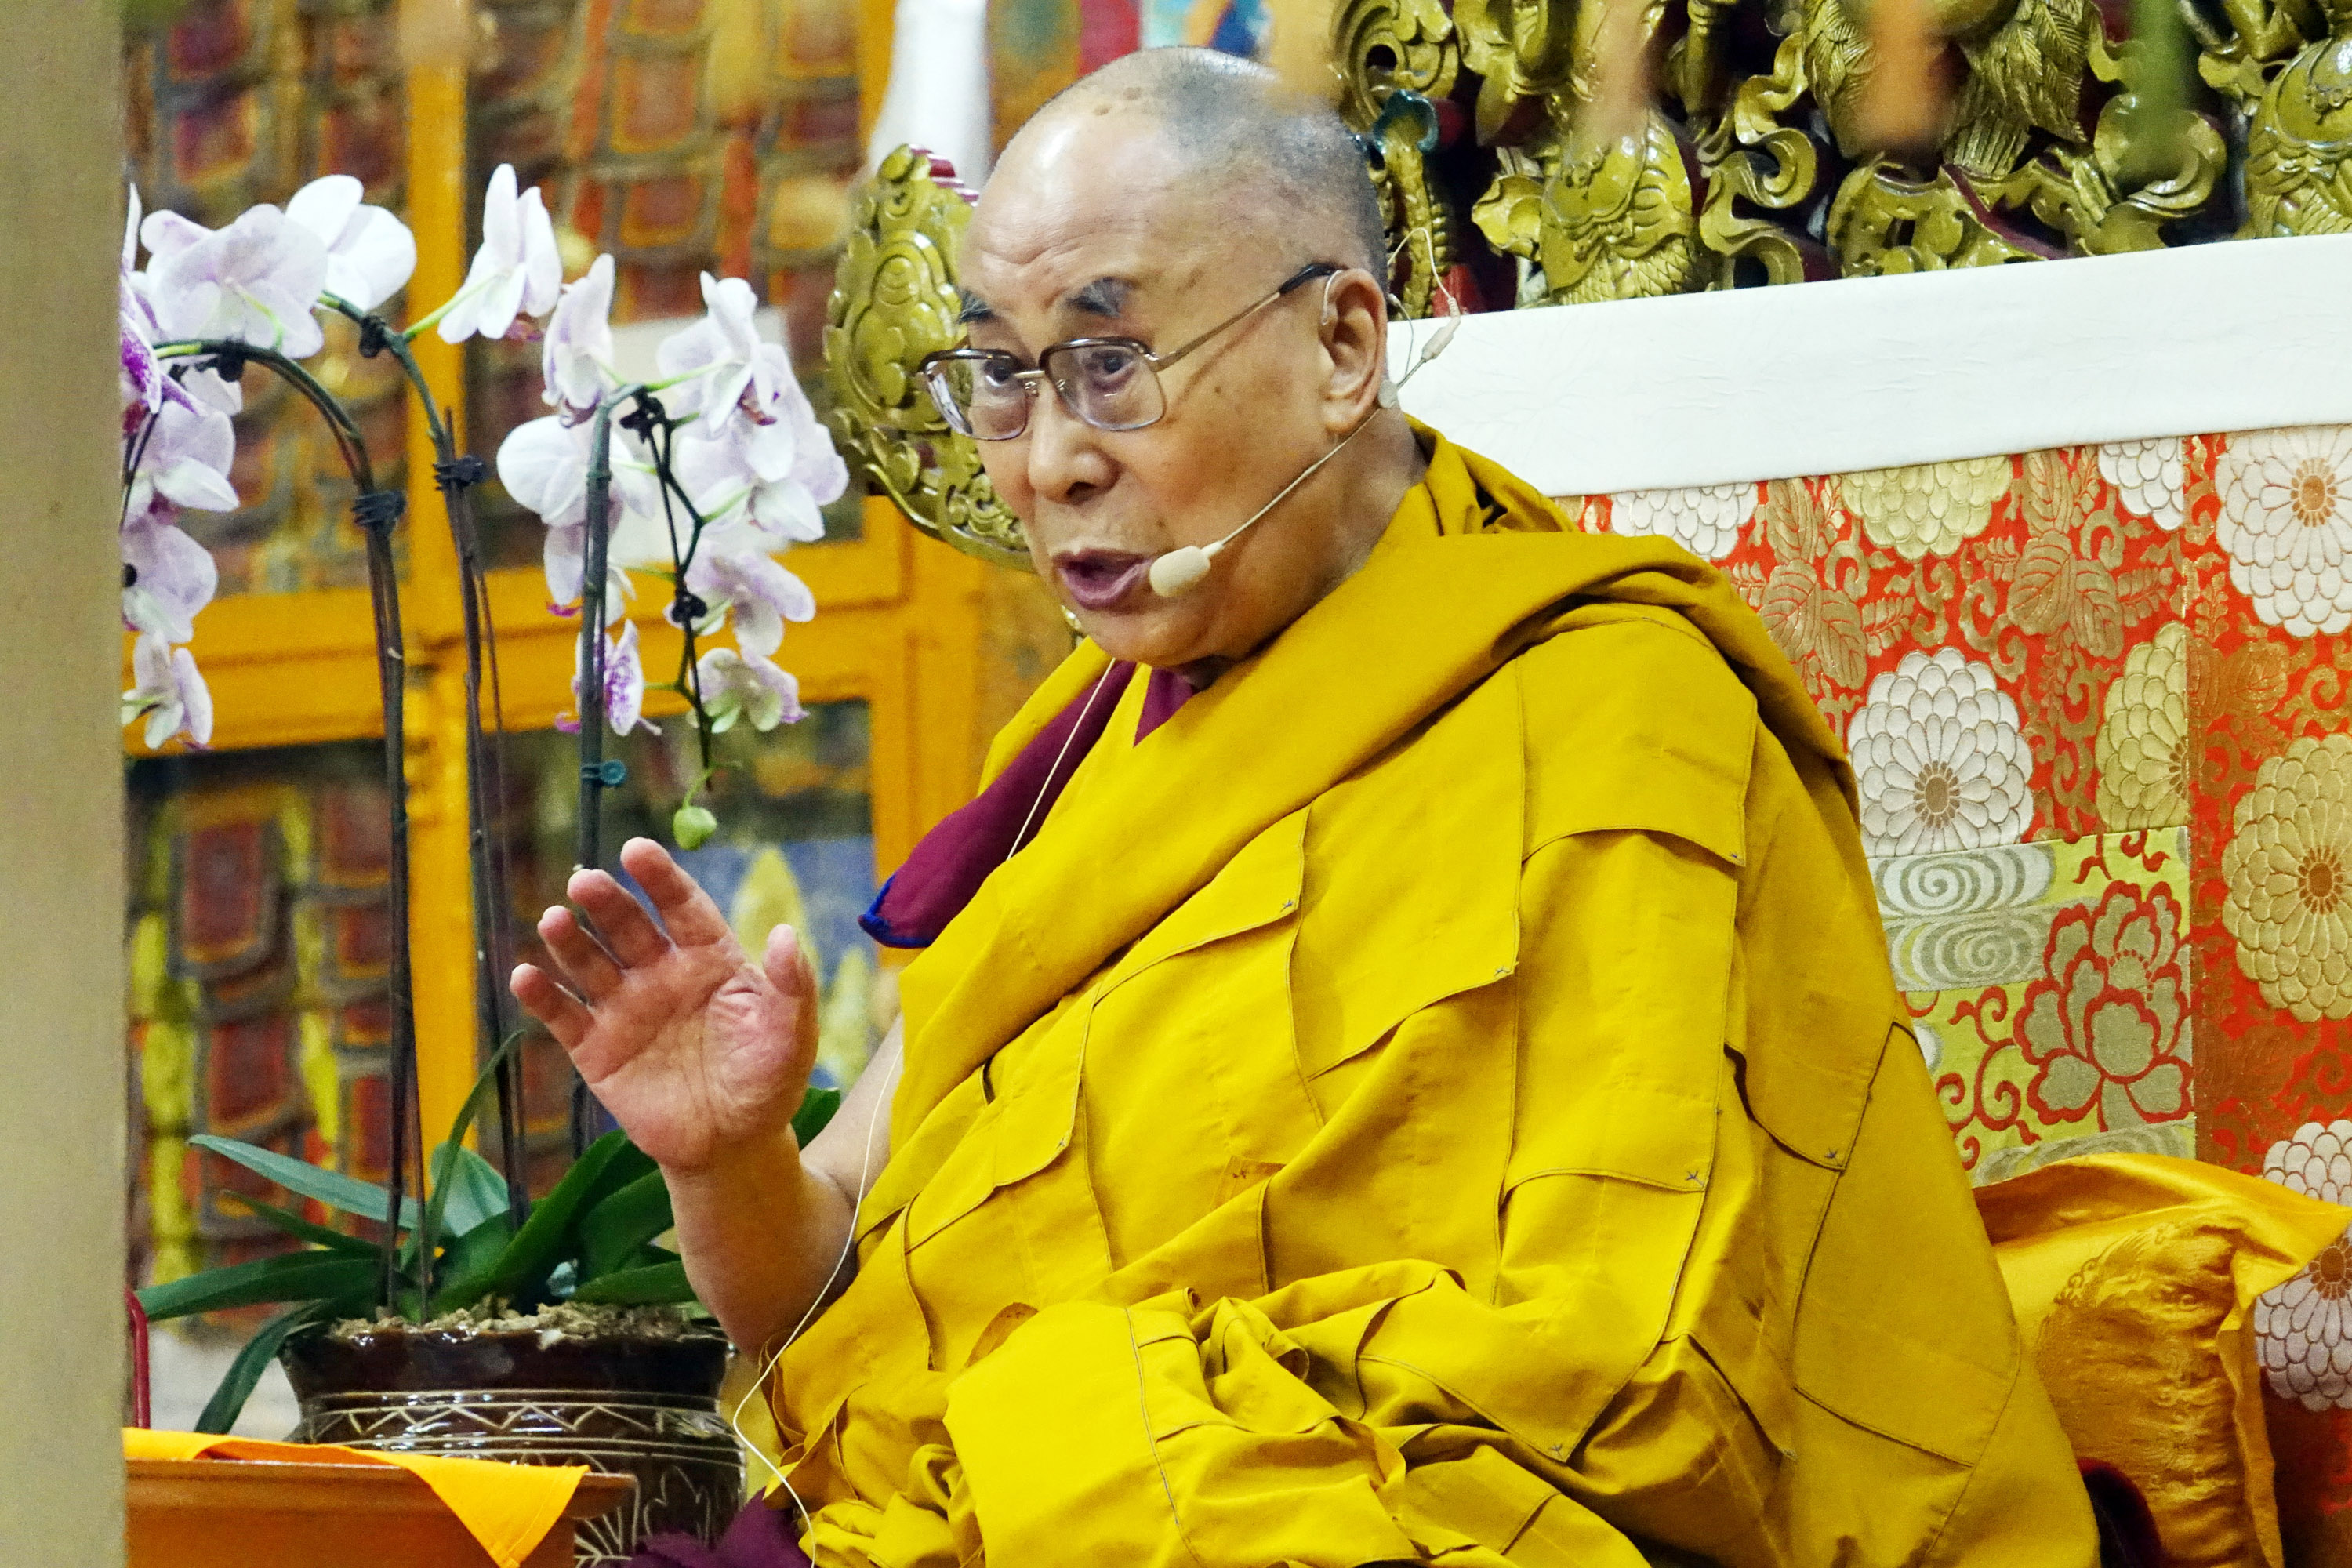 Tibetan spiritual leader the Dalai Lama sits on his ceremonial chair as he prays before beginning a religious talk at the Tsuglakhang Temple on Oct. 6, 2017 in Dharamsala, India. (Shyam Sharma—Hindustan Times/Getty Images)